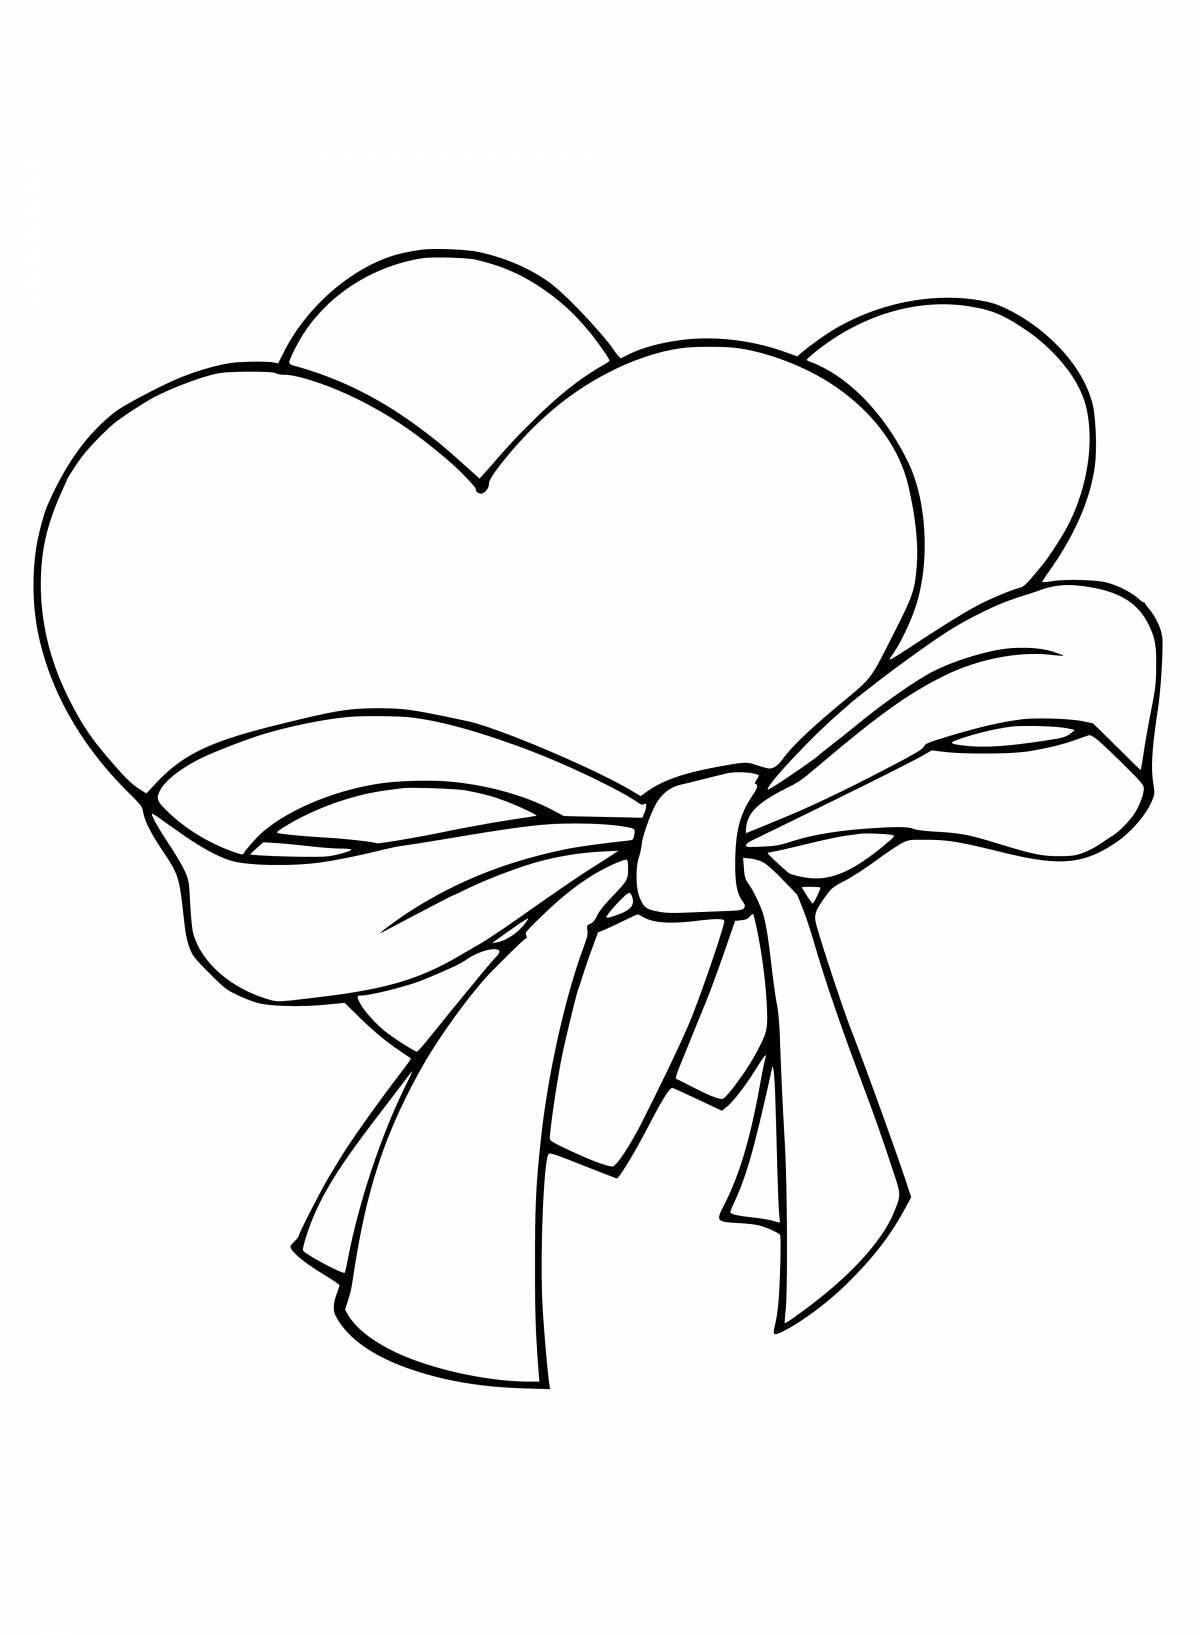 Adorable Heart Coloring Page